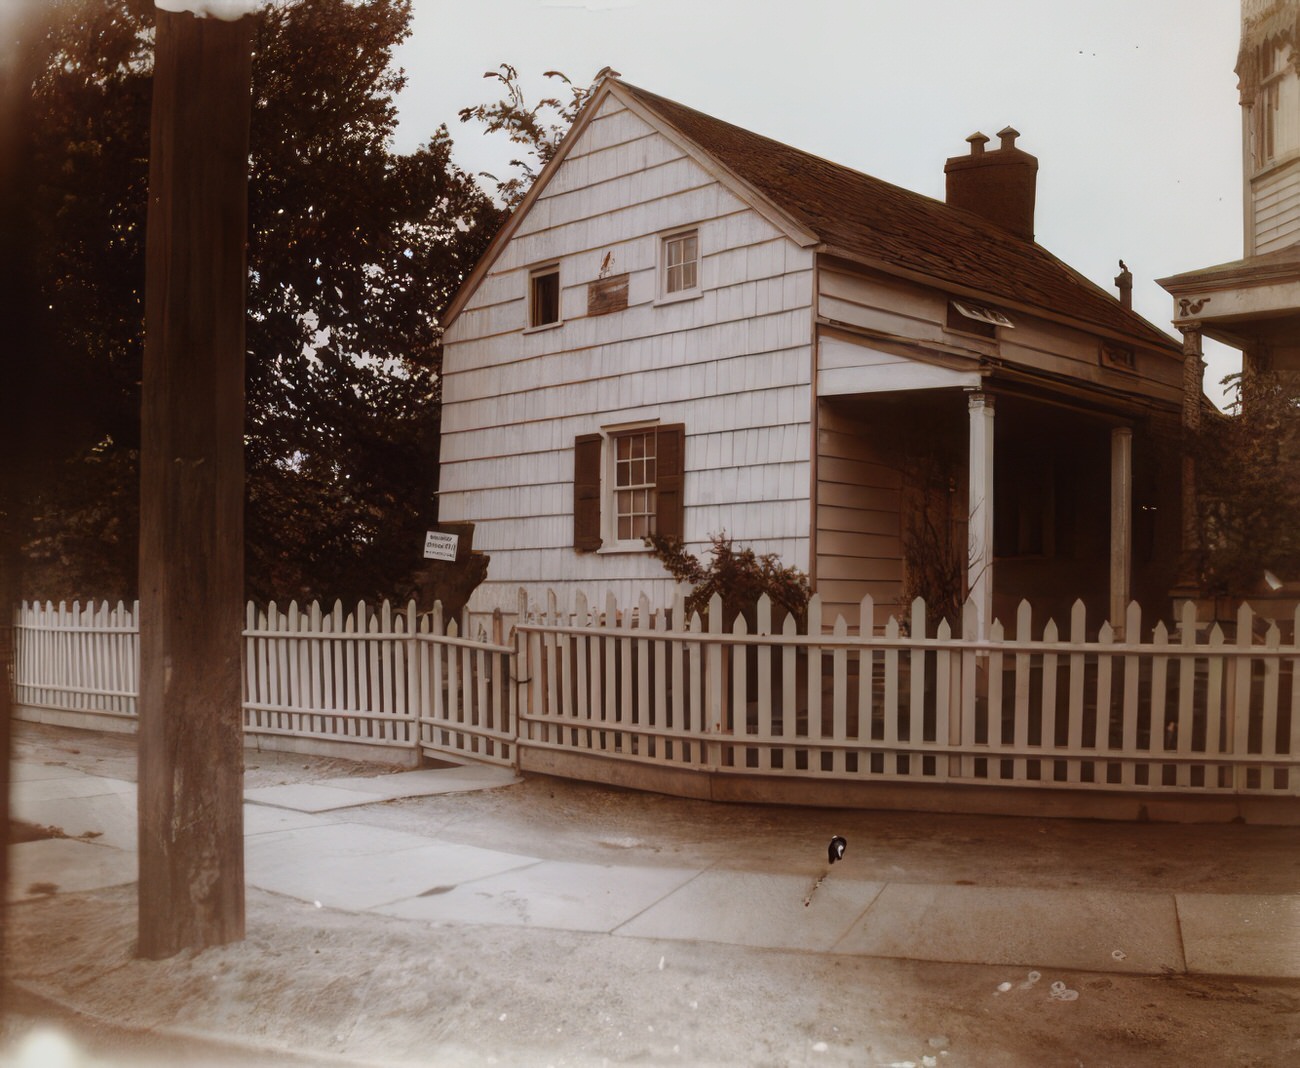 Poe Cottage Before Moving, Circa 1905.